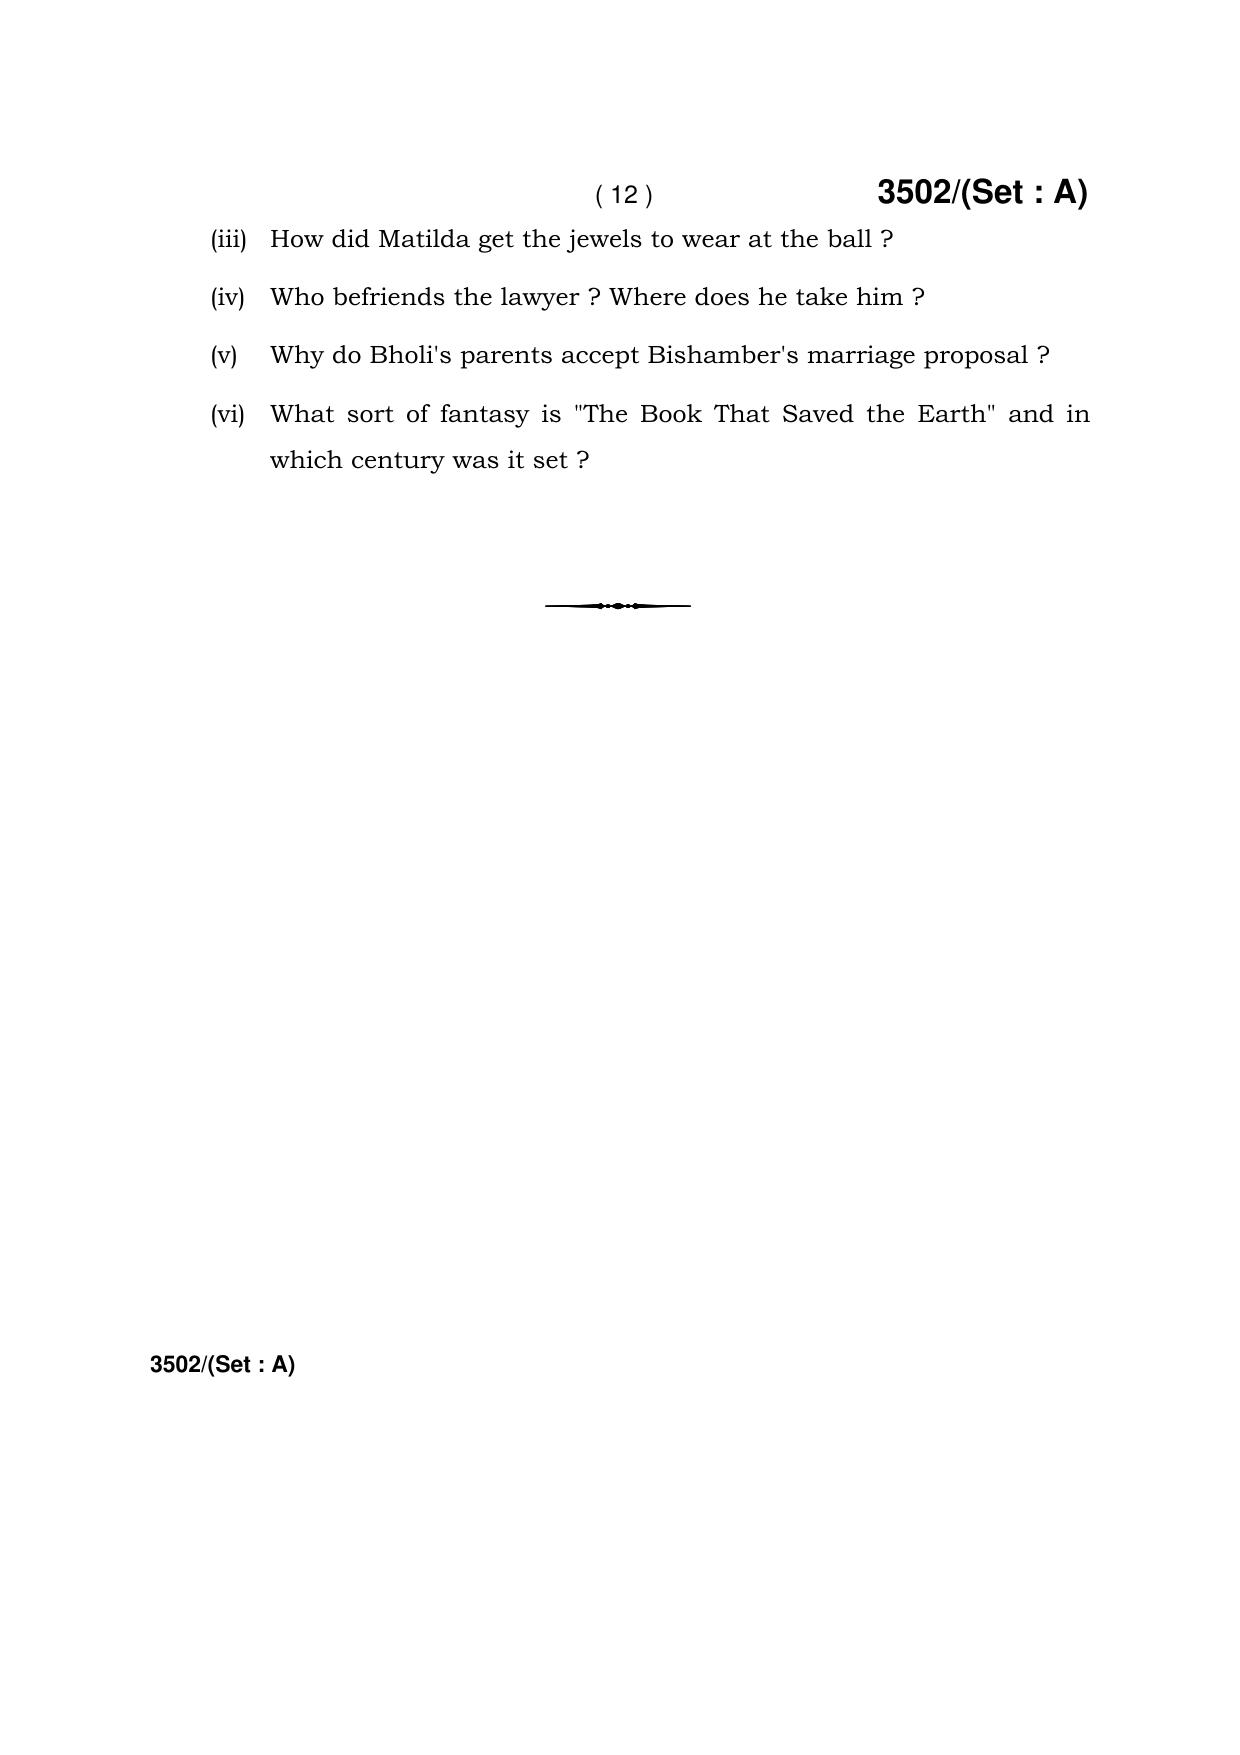 Haryana Board HBSE Class 10 English -A 2018 Question Paper - Page 12